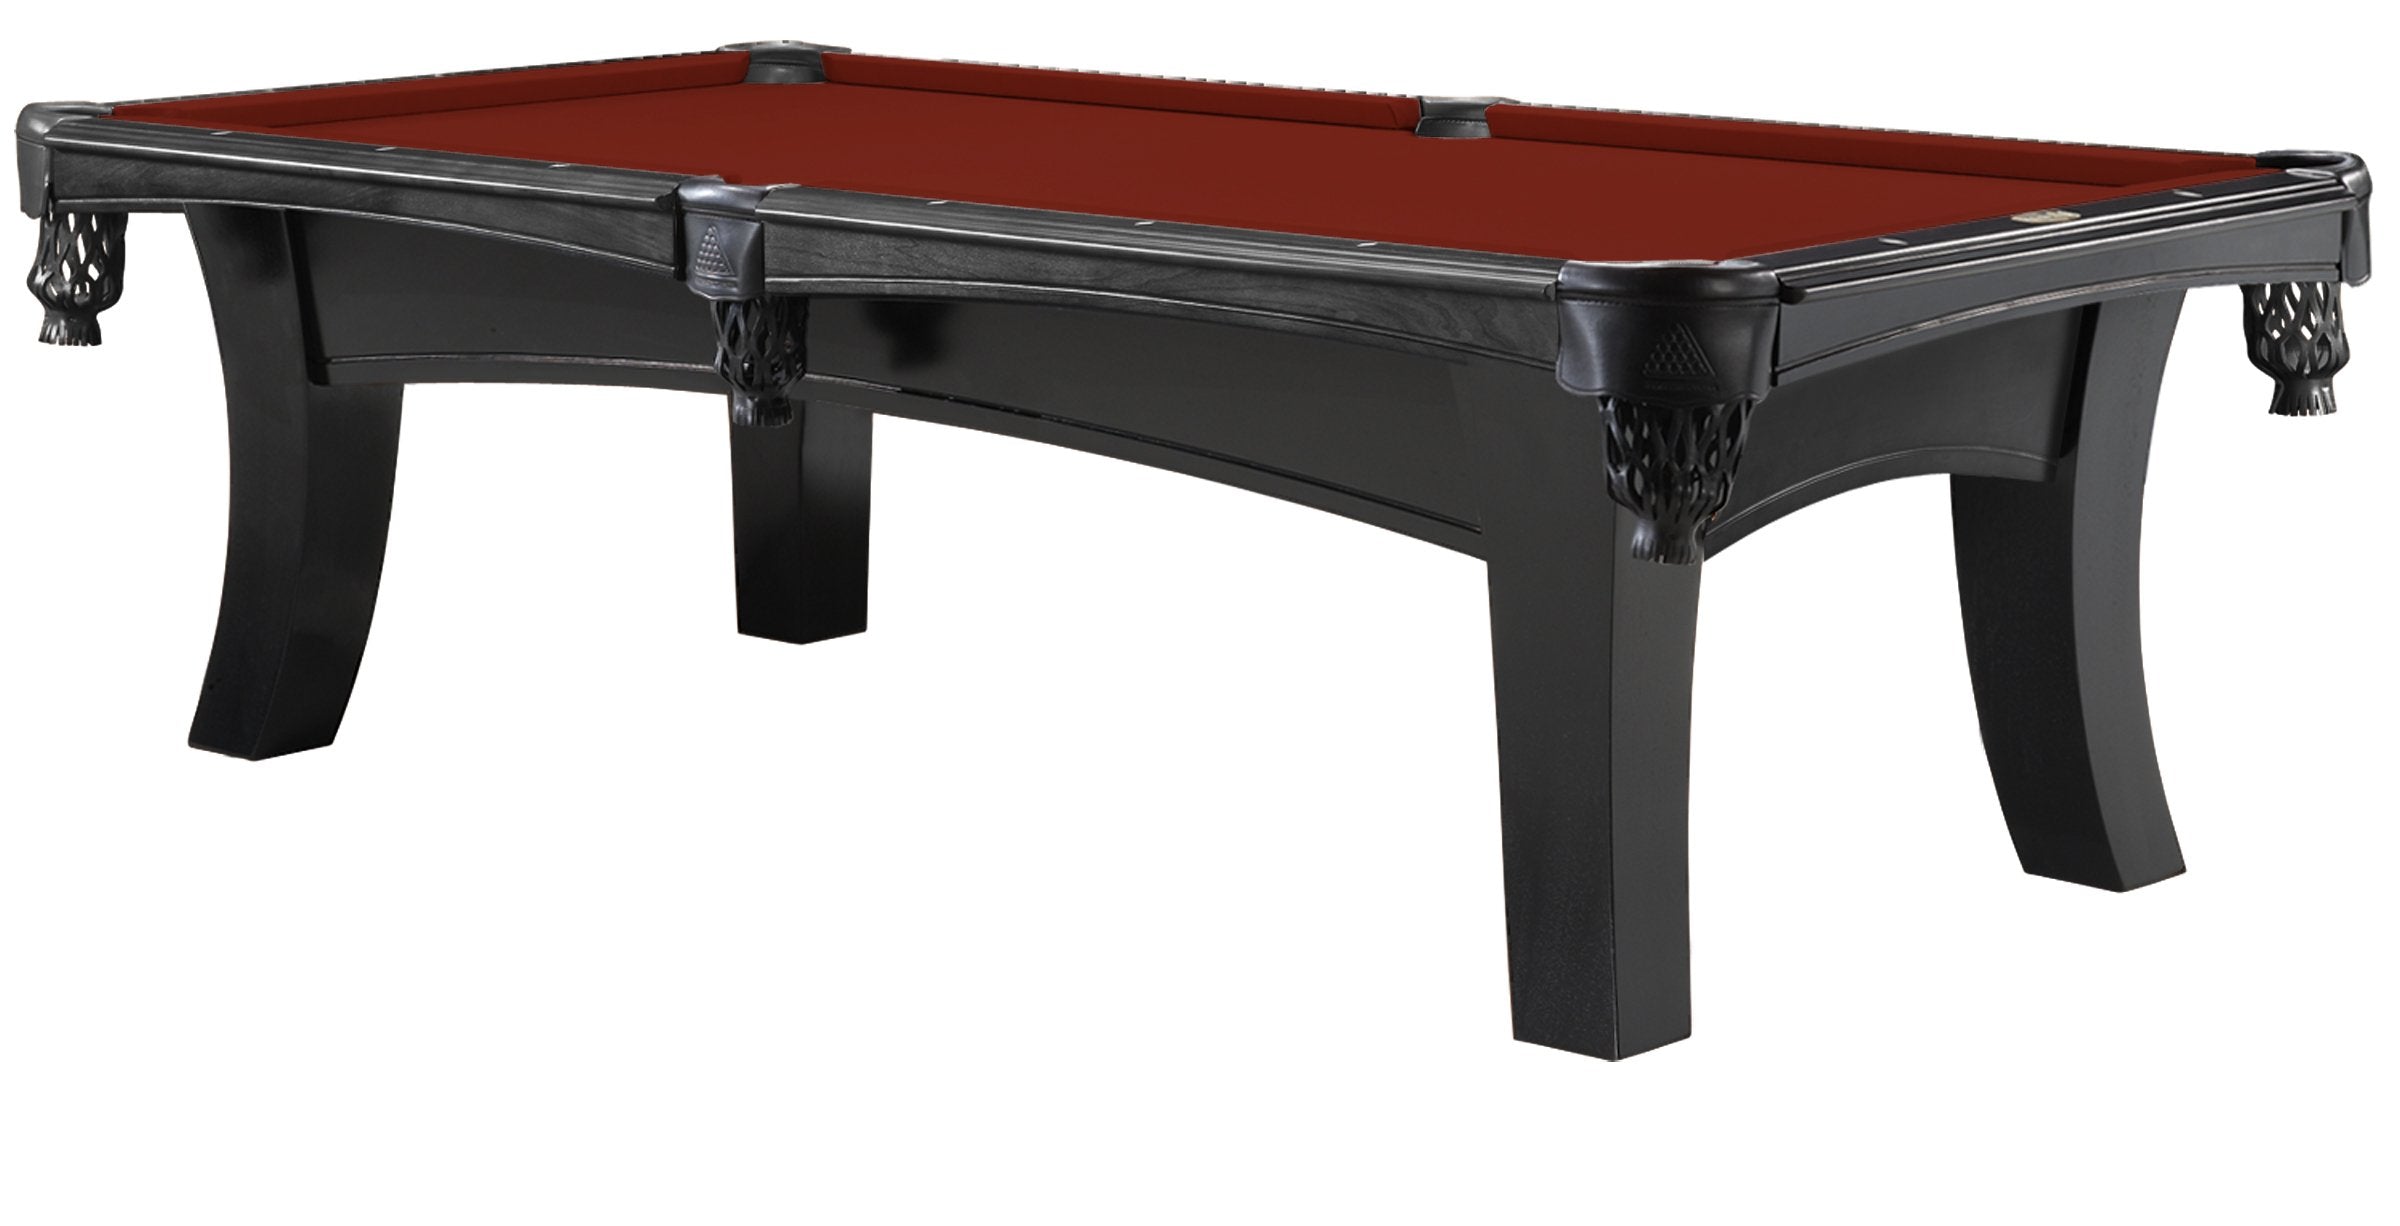 Legacy Billiards 8 Ft Ella Pool Table in Graphite Finish with Red Cloth